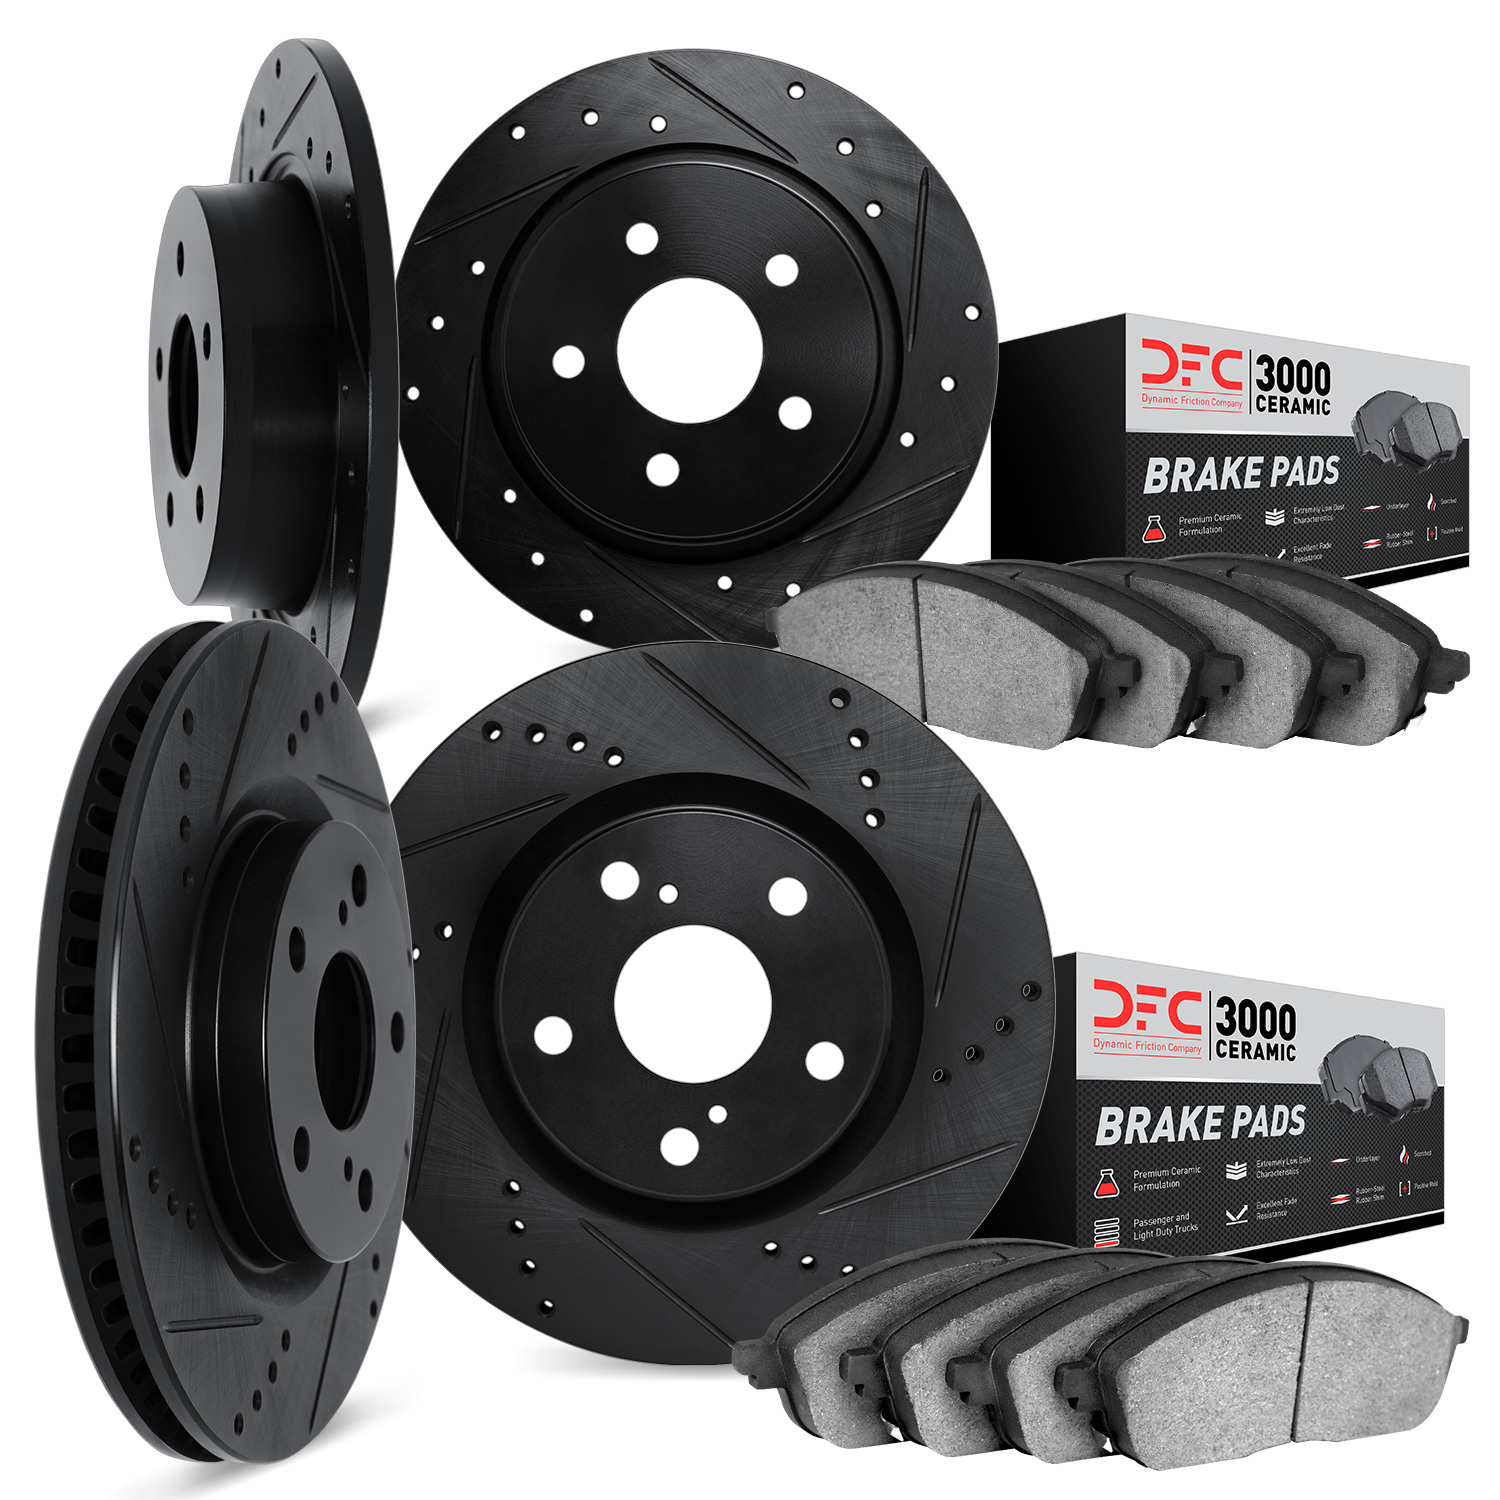 8304-59059 Drilled/Slotted Brake Rotors with 3000-Series Ceramic Brake Pads Kit [Black], 2005-2010 Acura/Honda, Position: Front